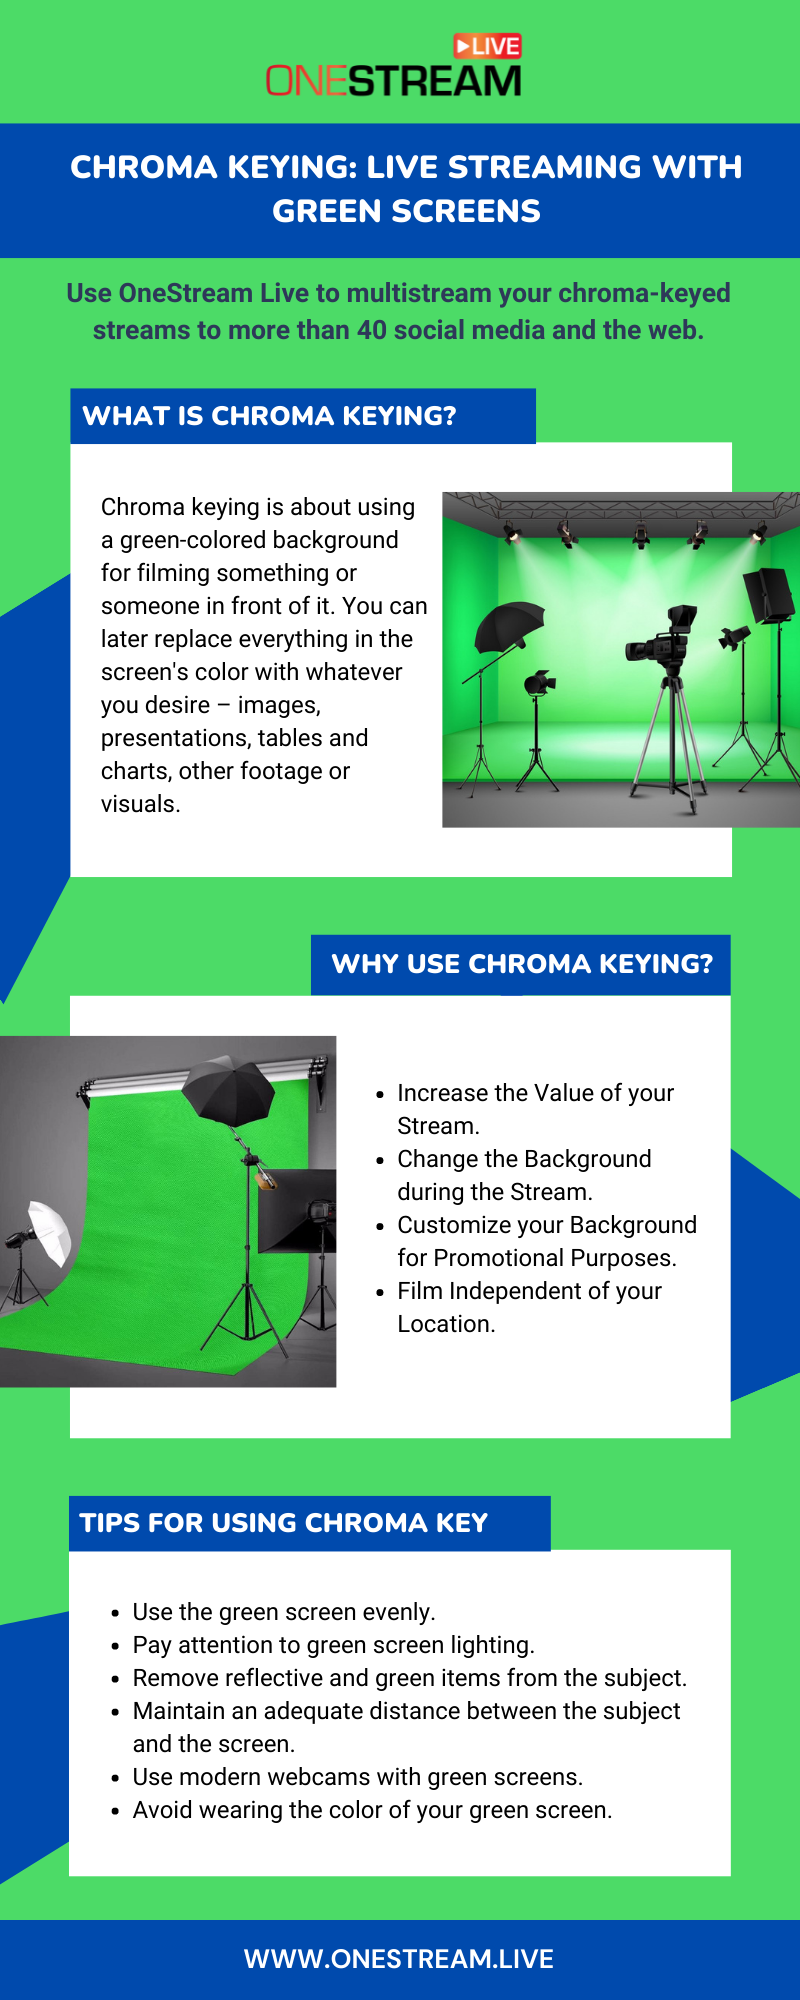 Chroma keying - live streaming with green screens